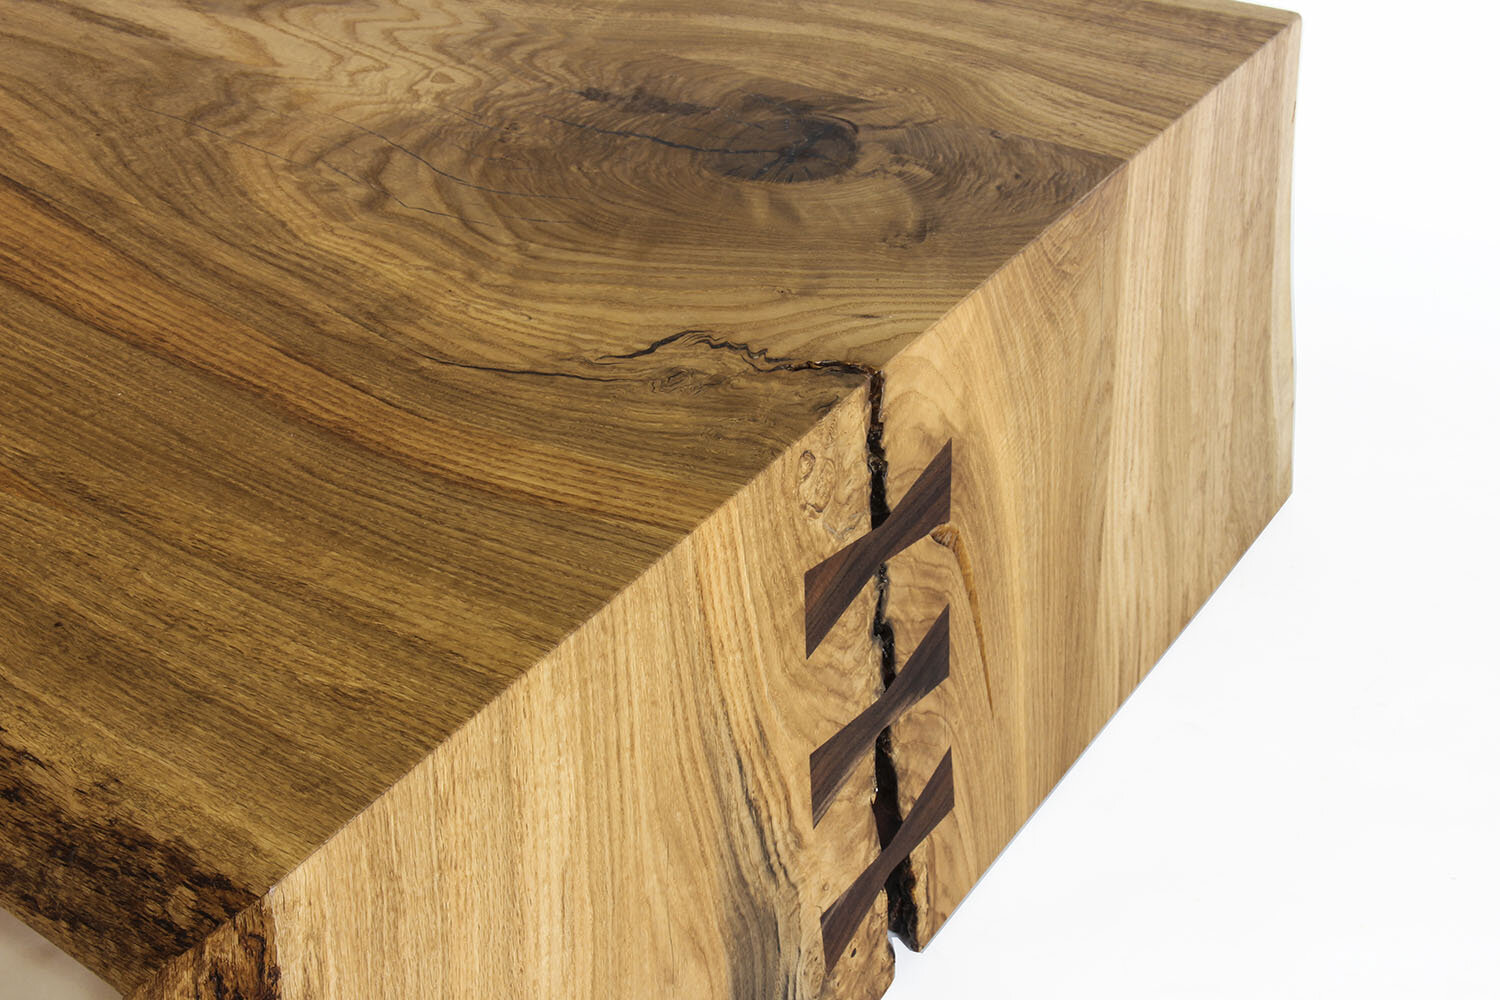 Joinery Walnut Live Edge Bread Board – The Joinery